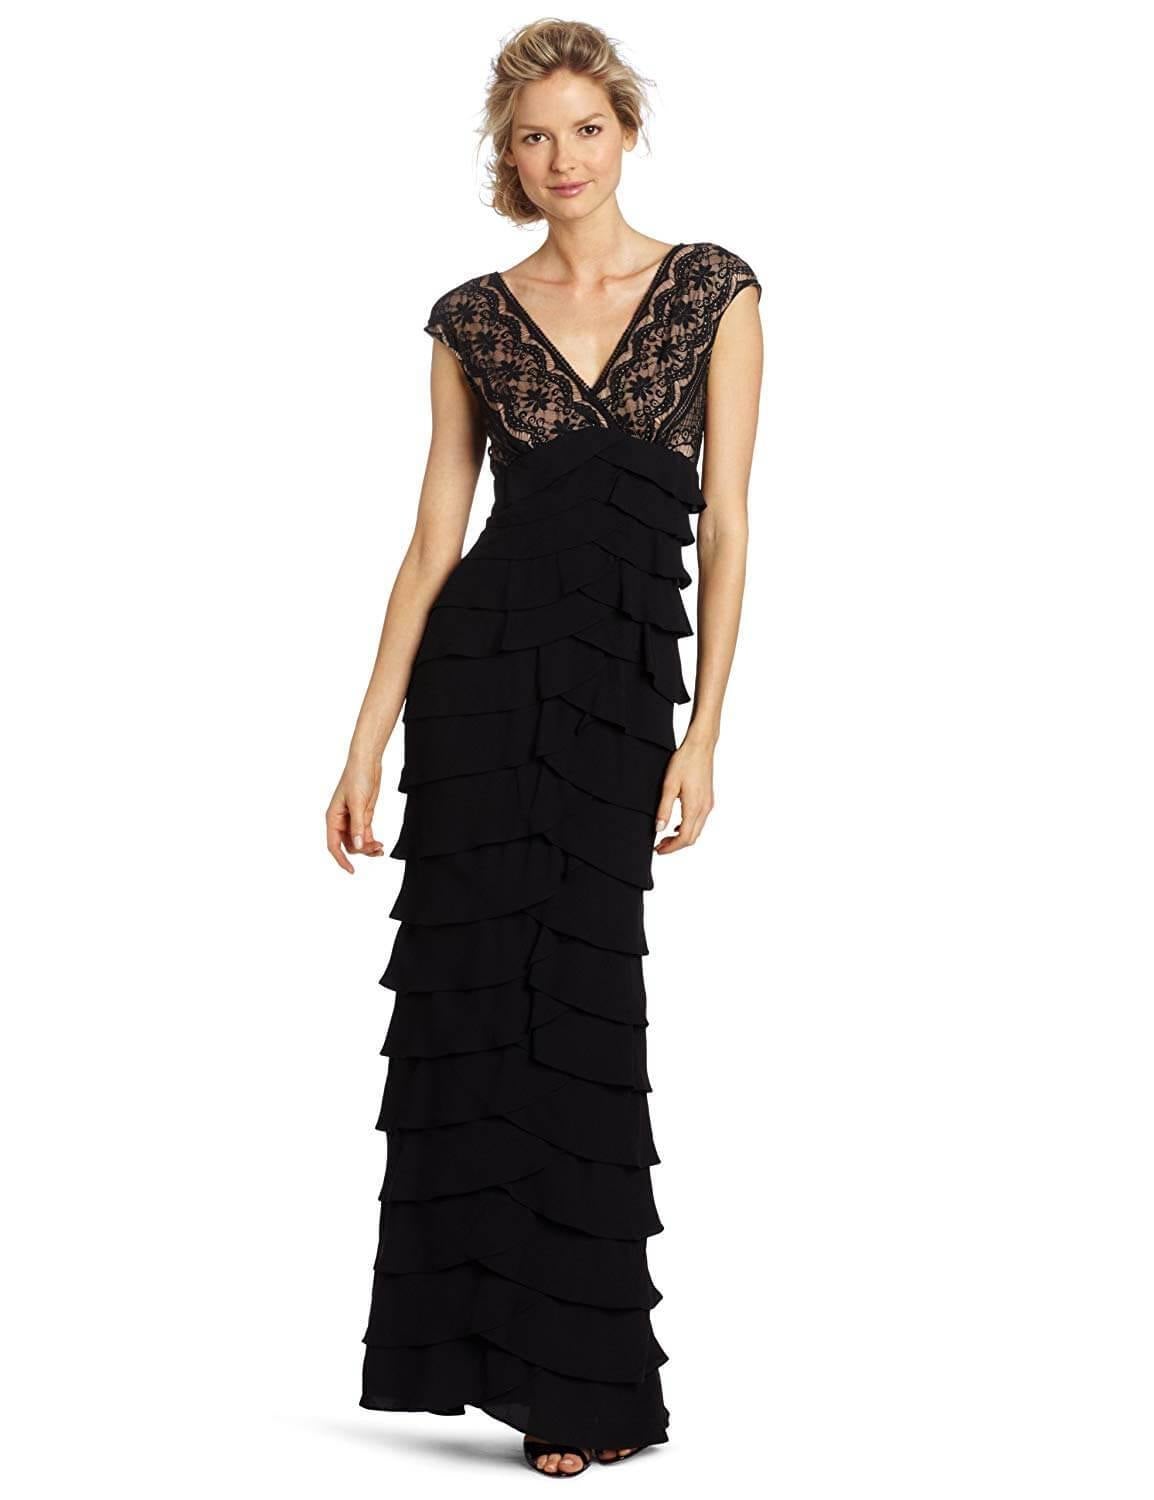 Adrianna Papell Cap Sleeve Long Formal Lace Dress - The Dress Outlet Adrianna Papell